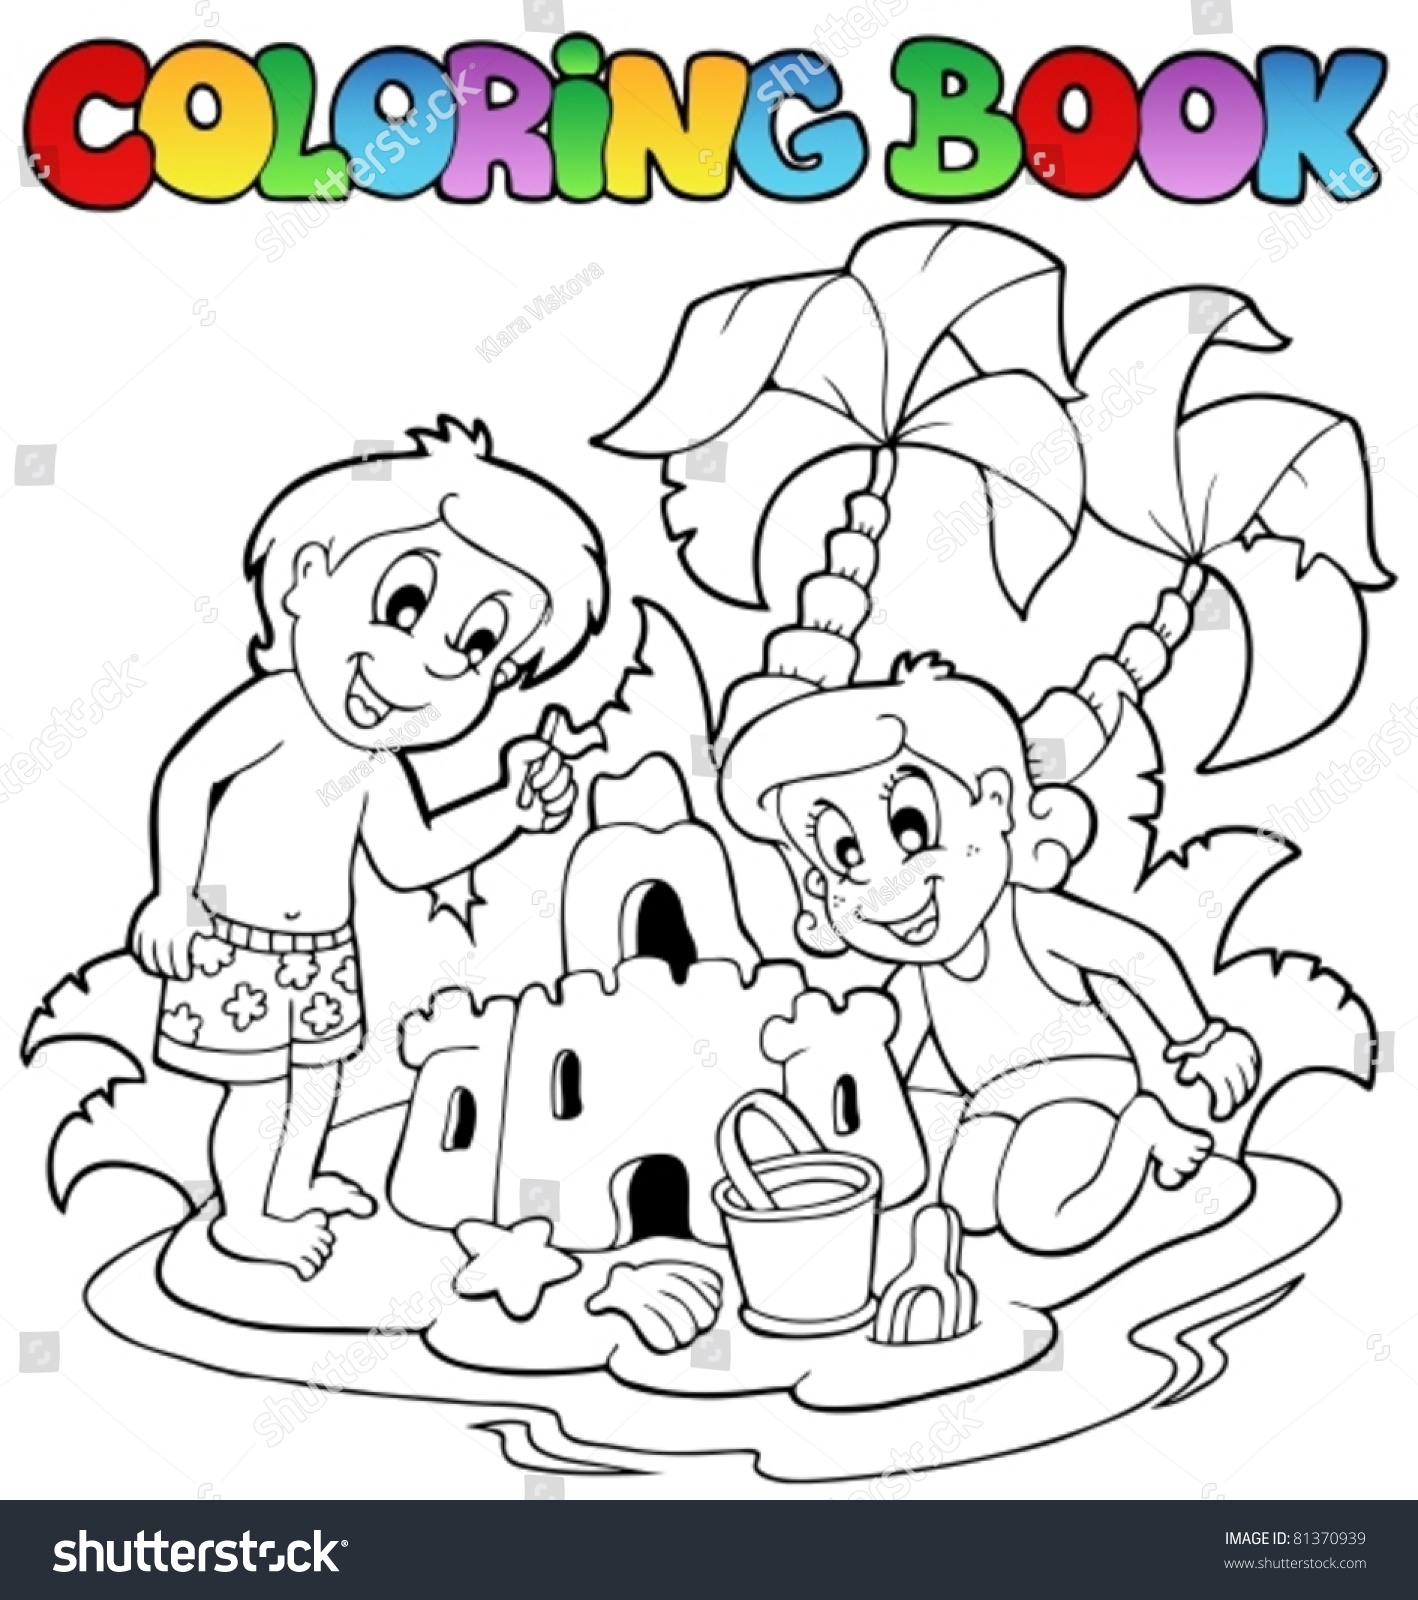 querkle coloring book pages - photo #44